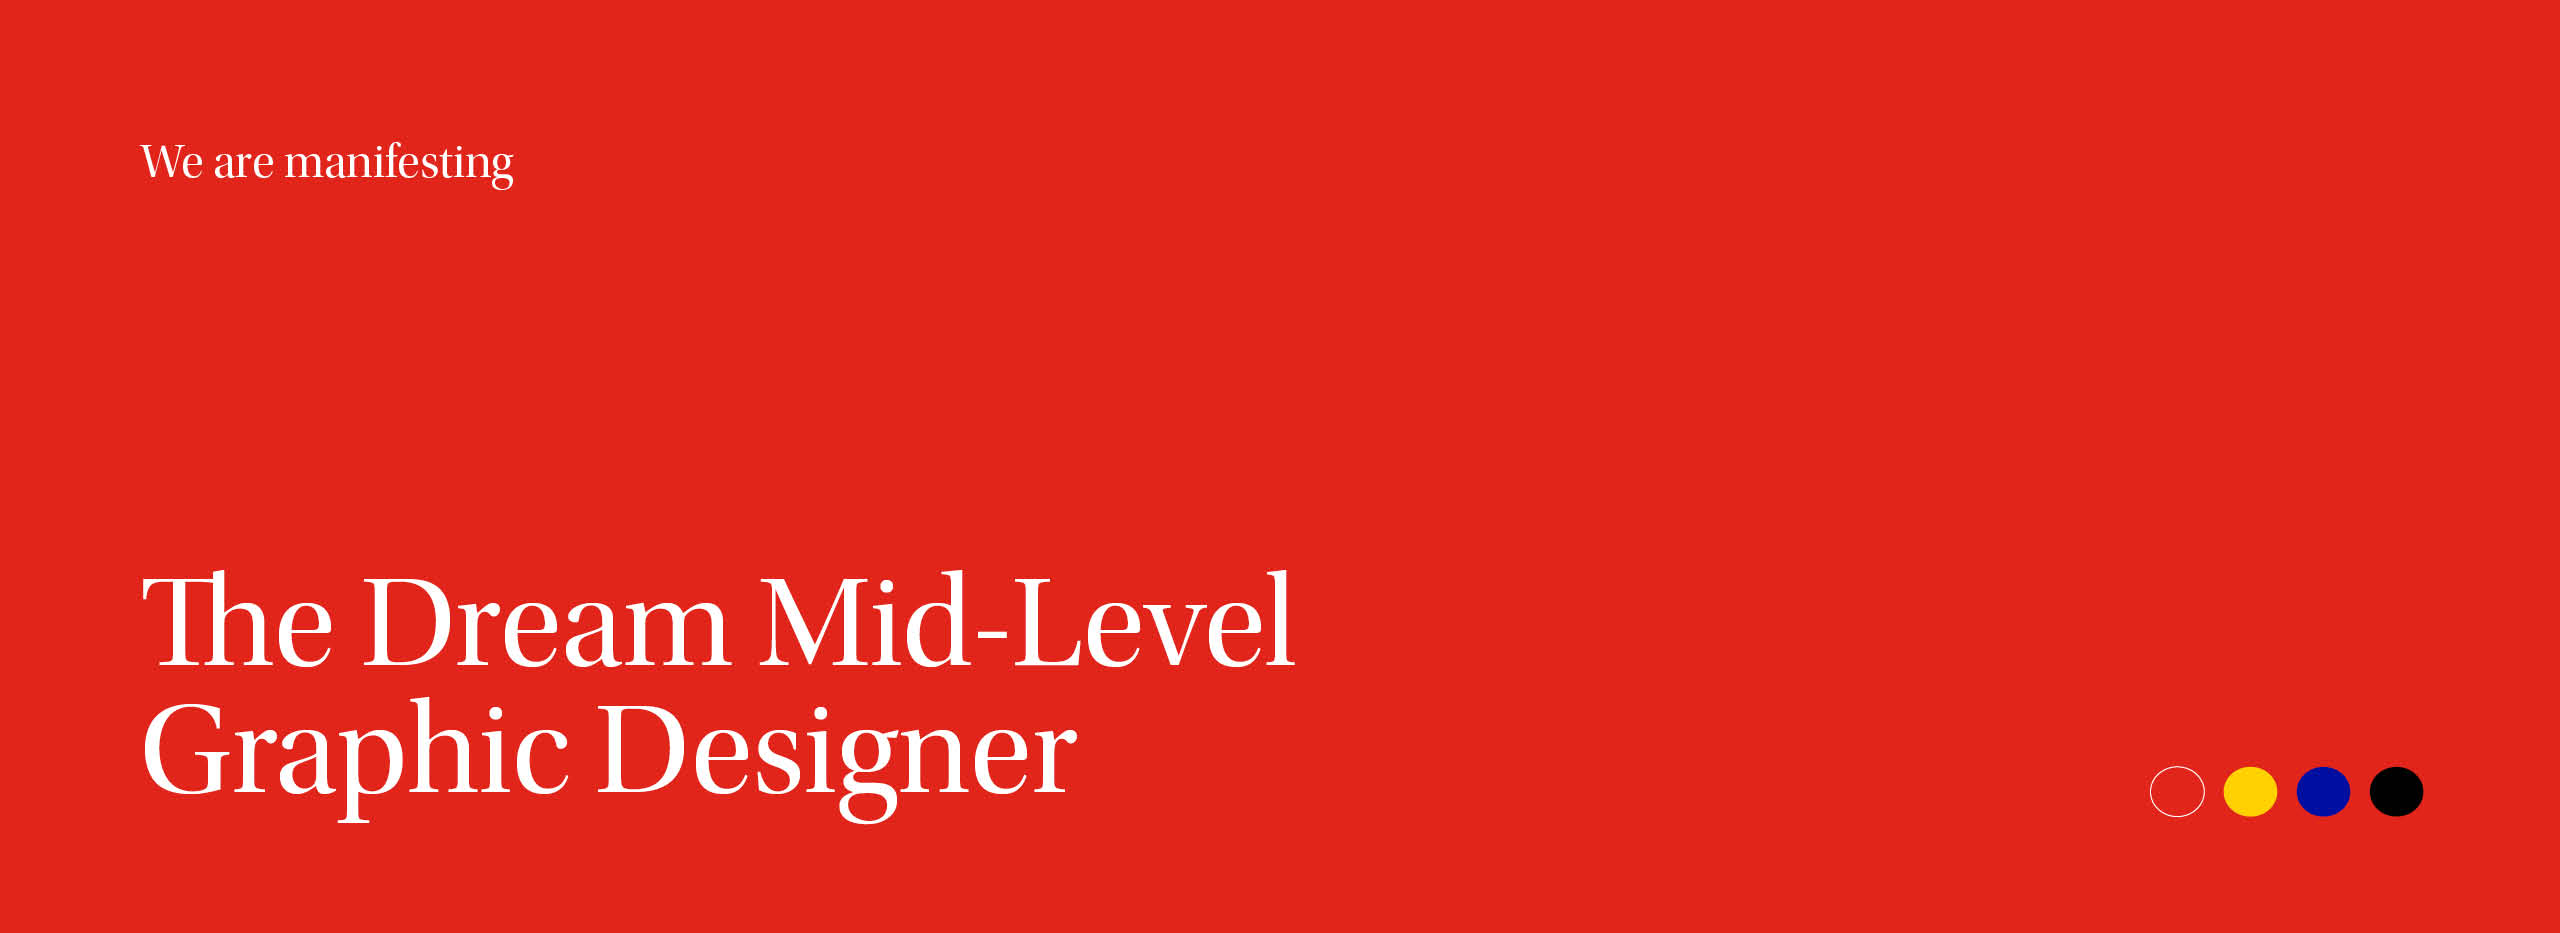 We are hiring a mid-level graphic designer! by Neiter Creative